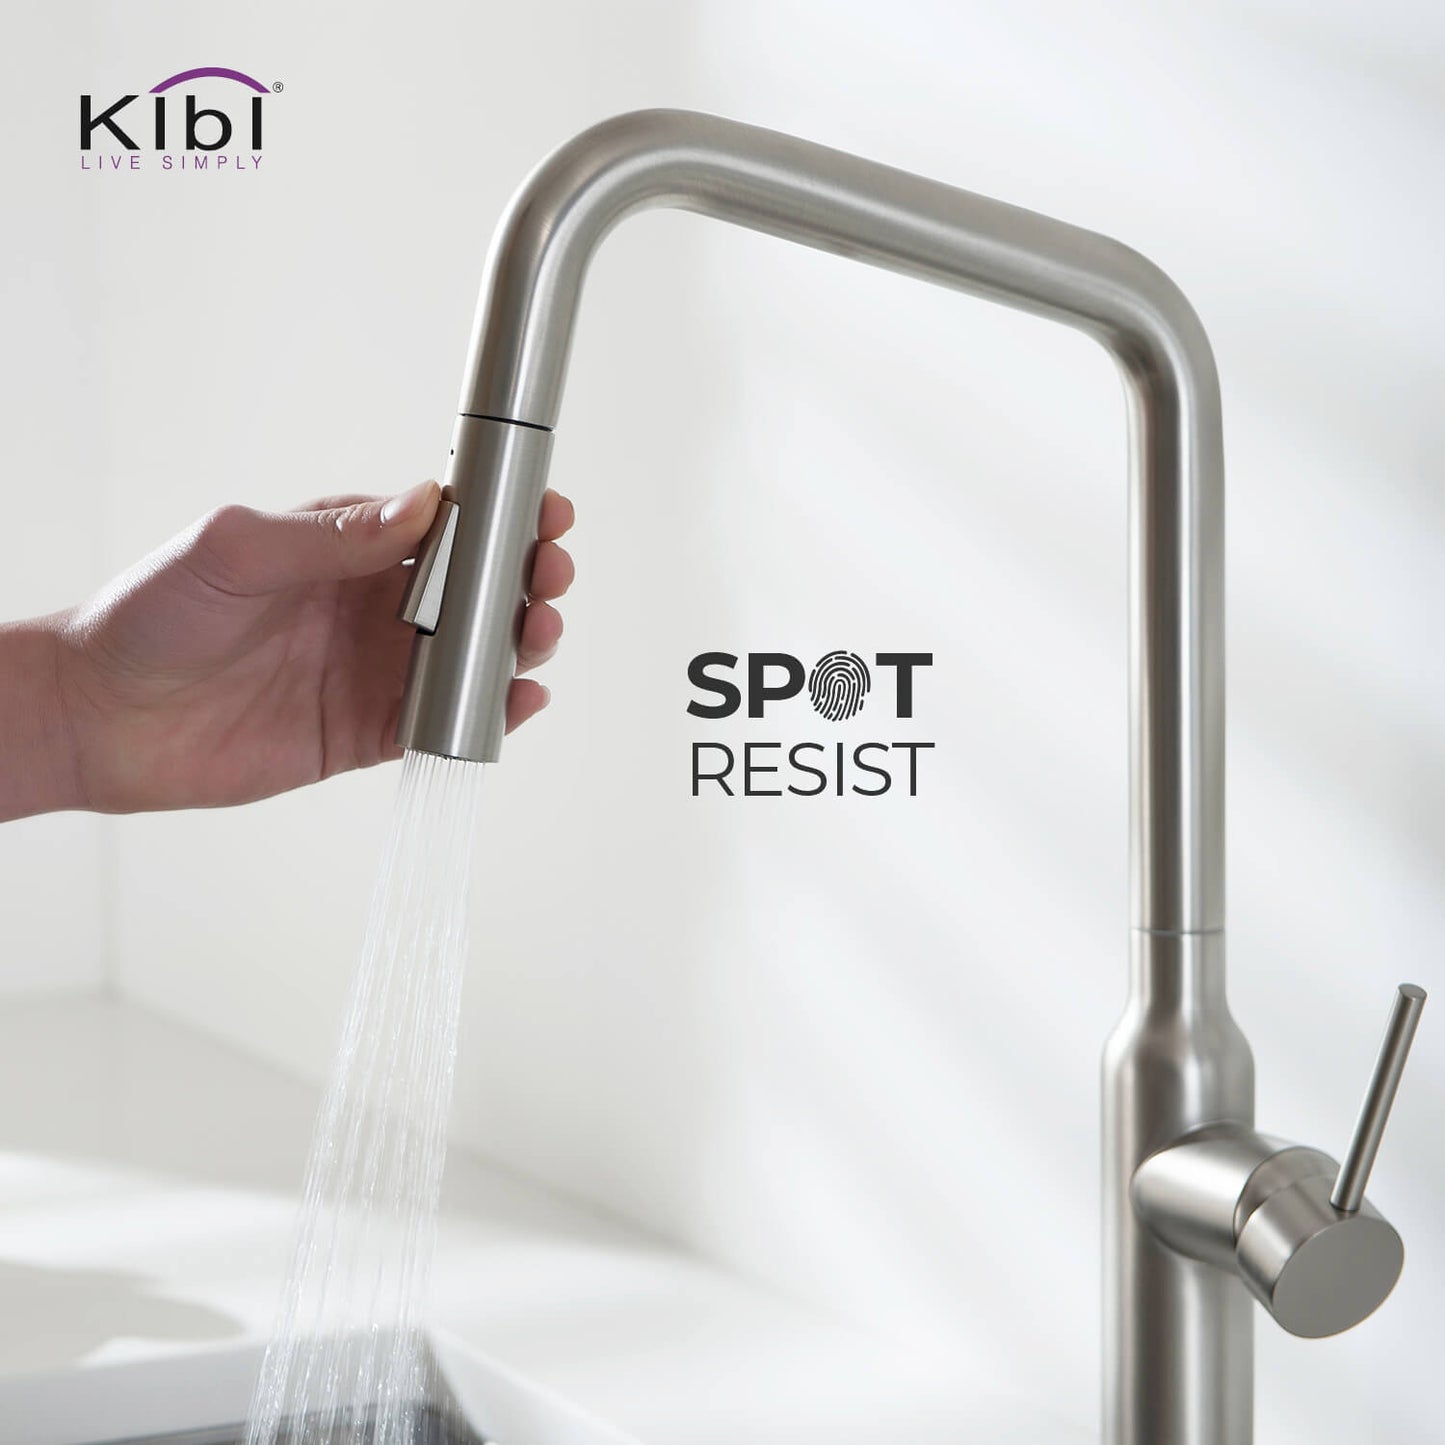 Kibi Macon Single Handle High Arc Pull Down Kitchen Faucet With Soap Dispenser in Brushed Nickel Finish